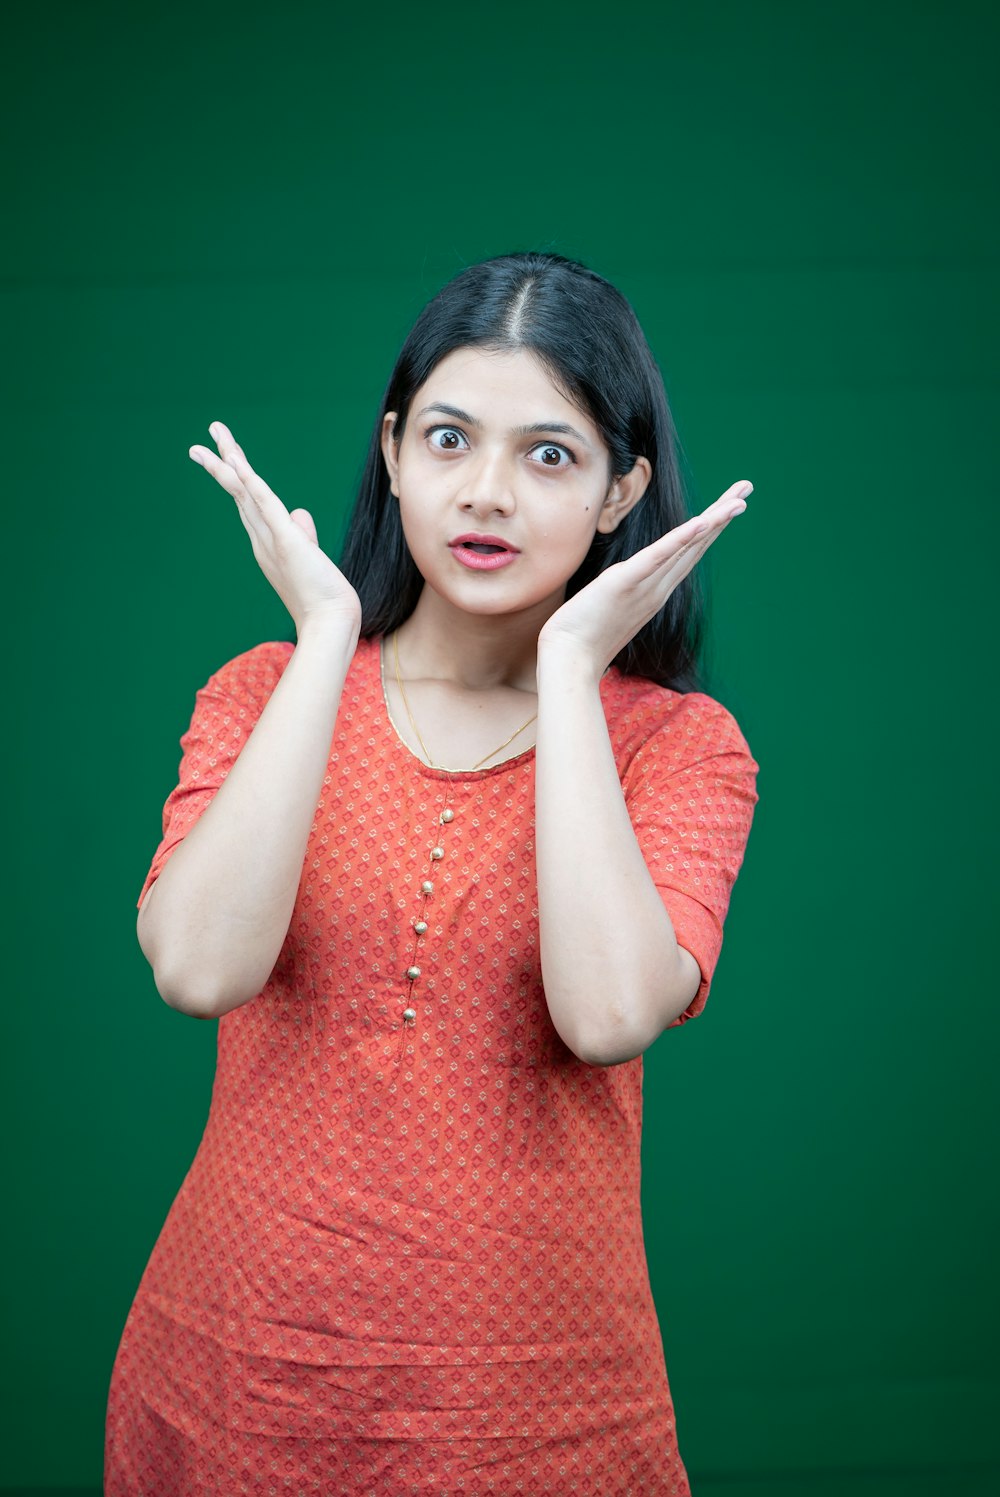 a woman making a hand gesture with her hands